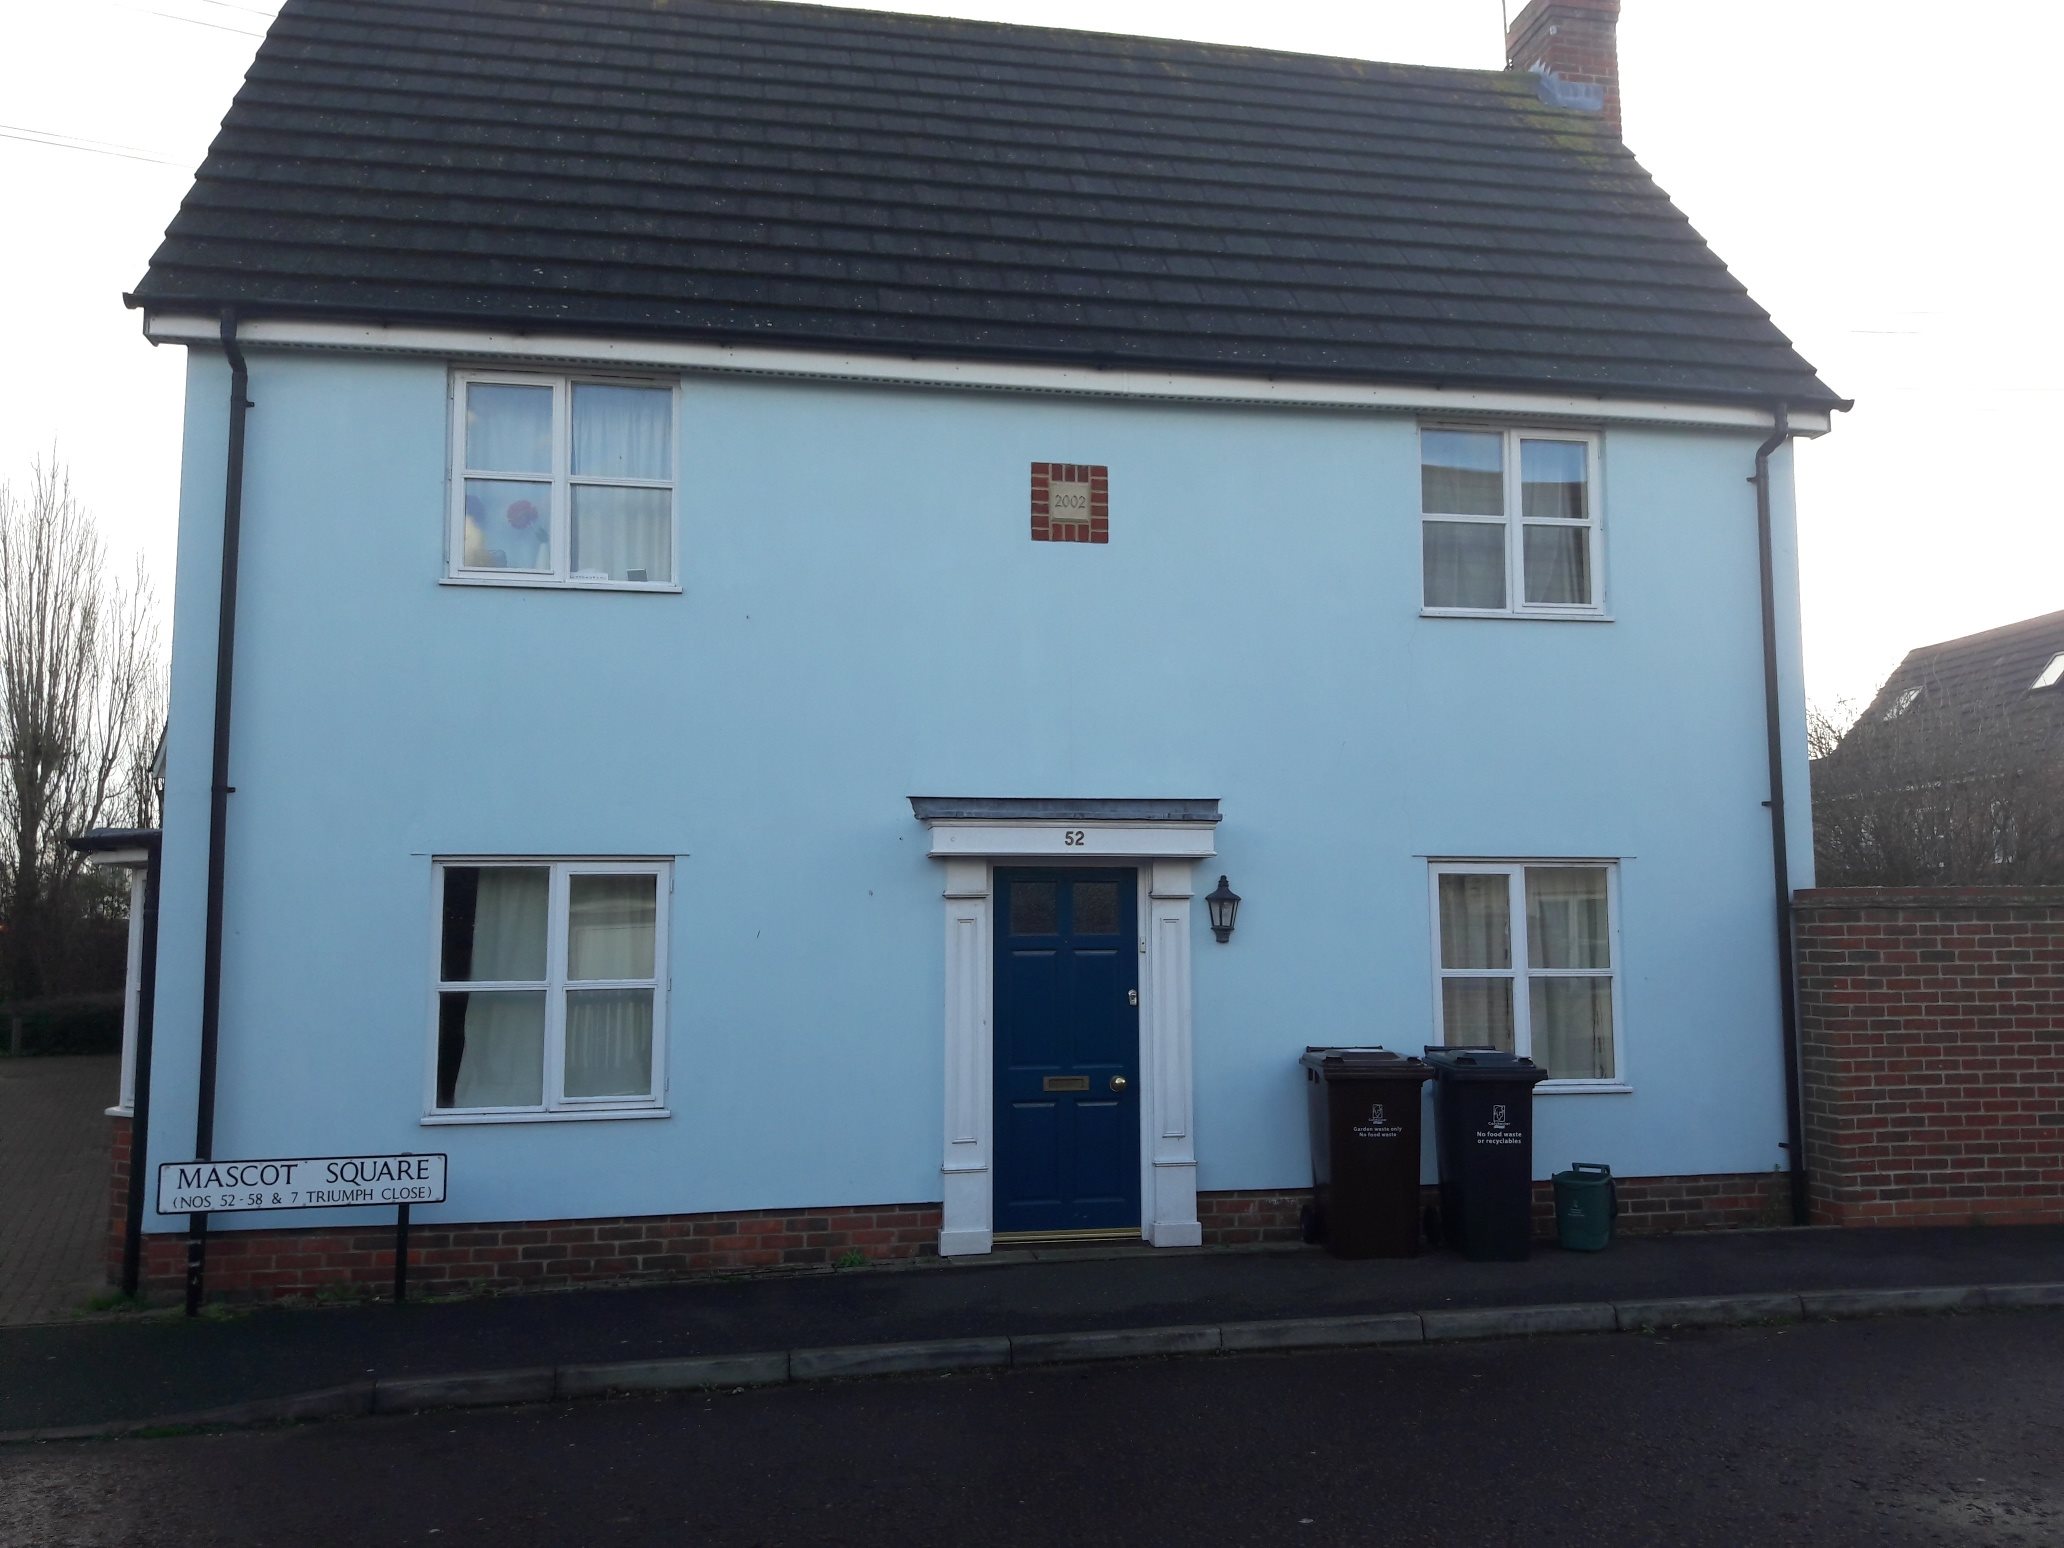 4 bed house to rent in Mascot Square, Colchester, CO4 